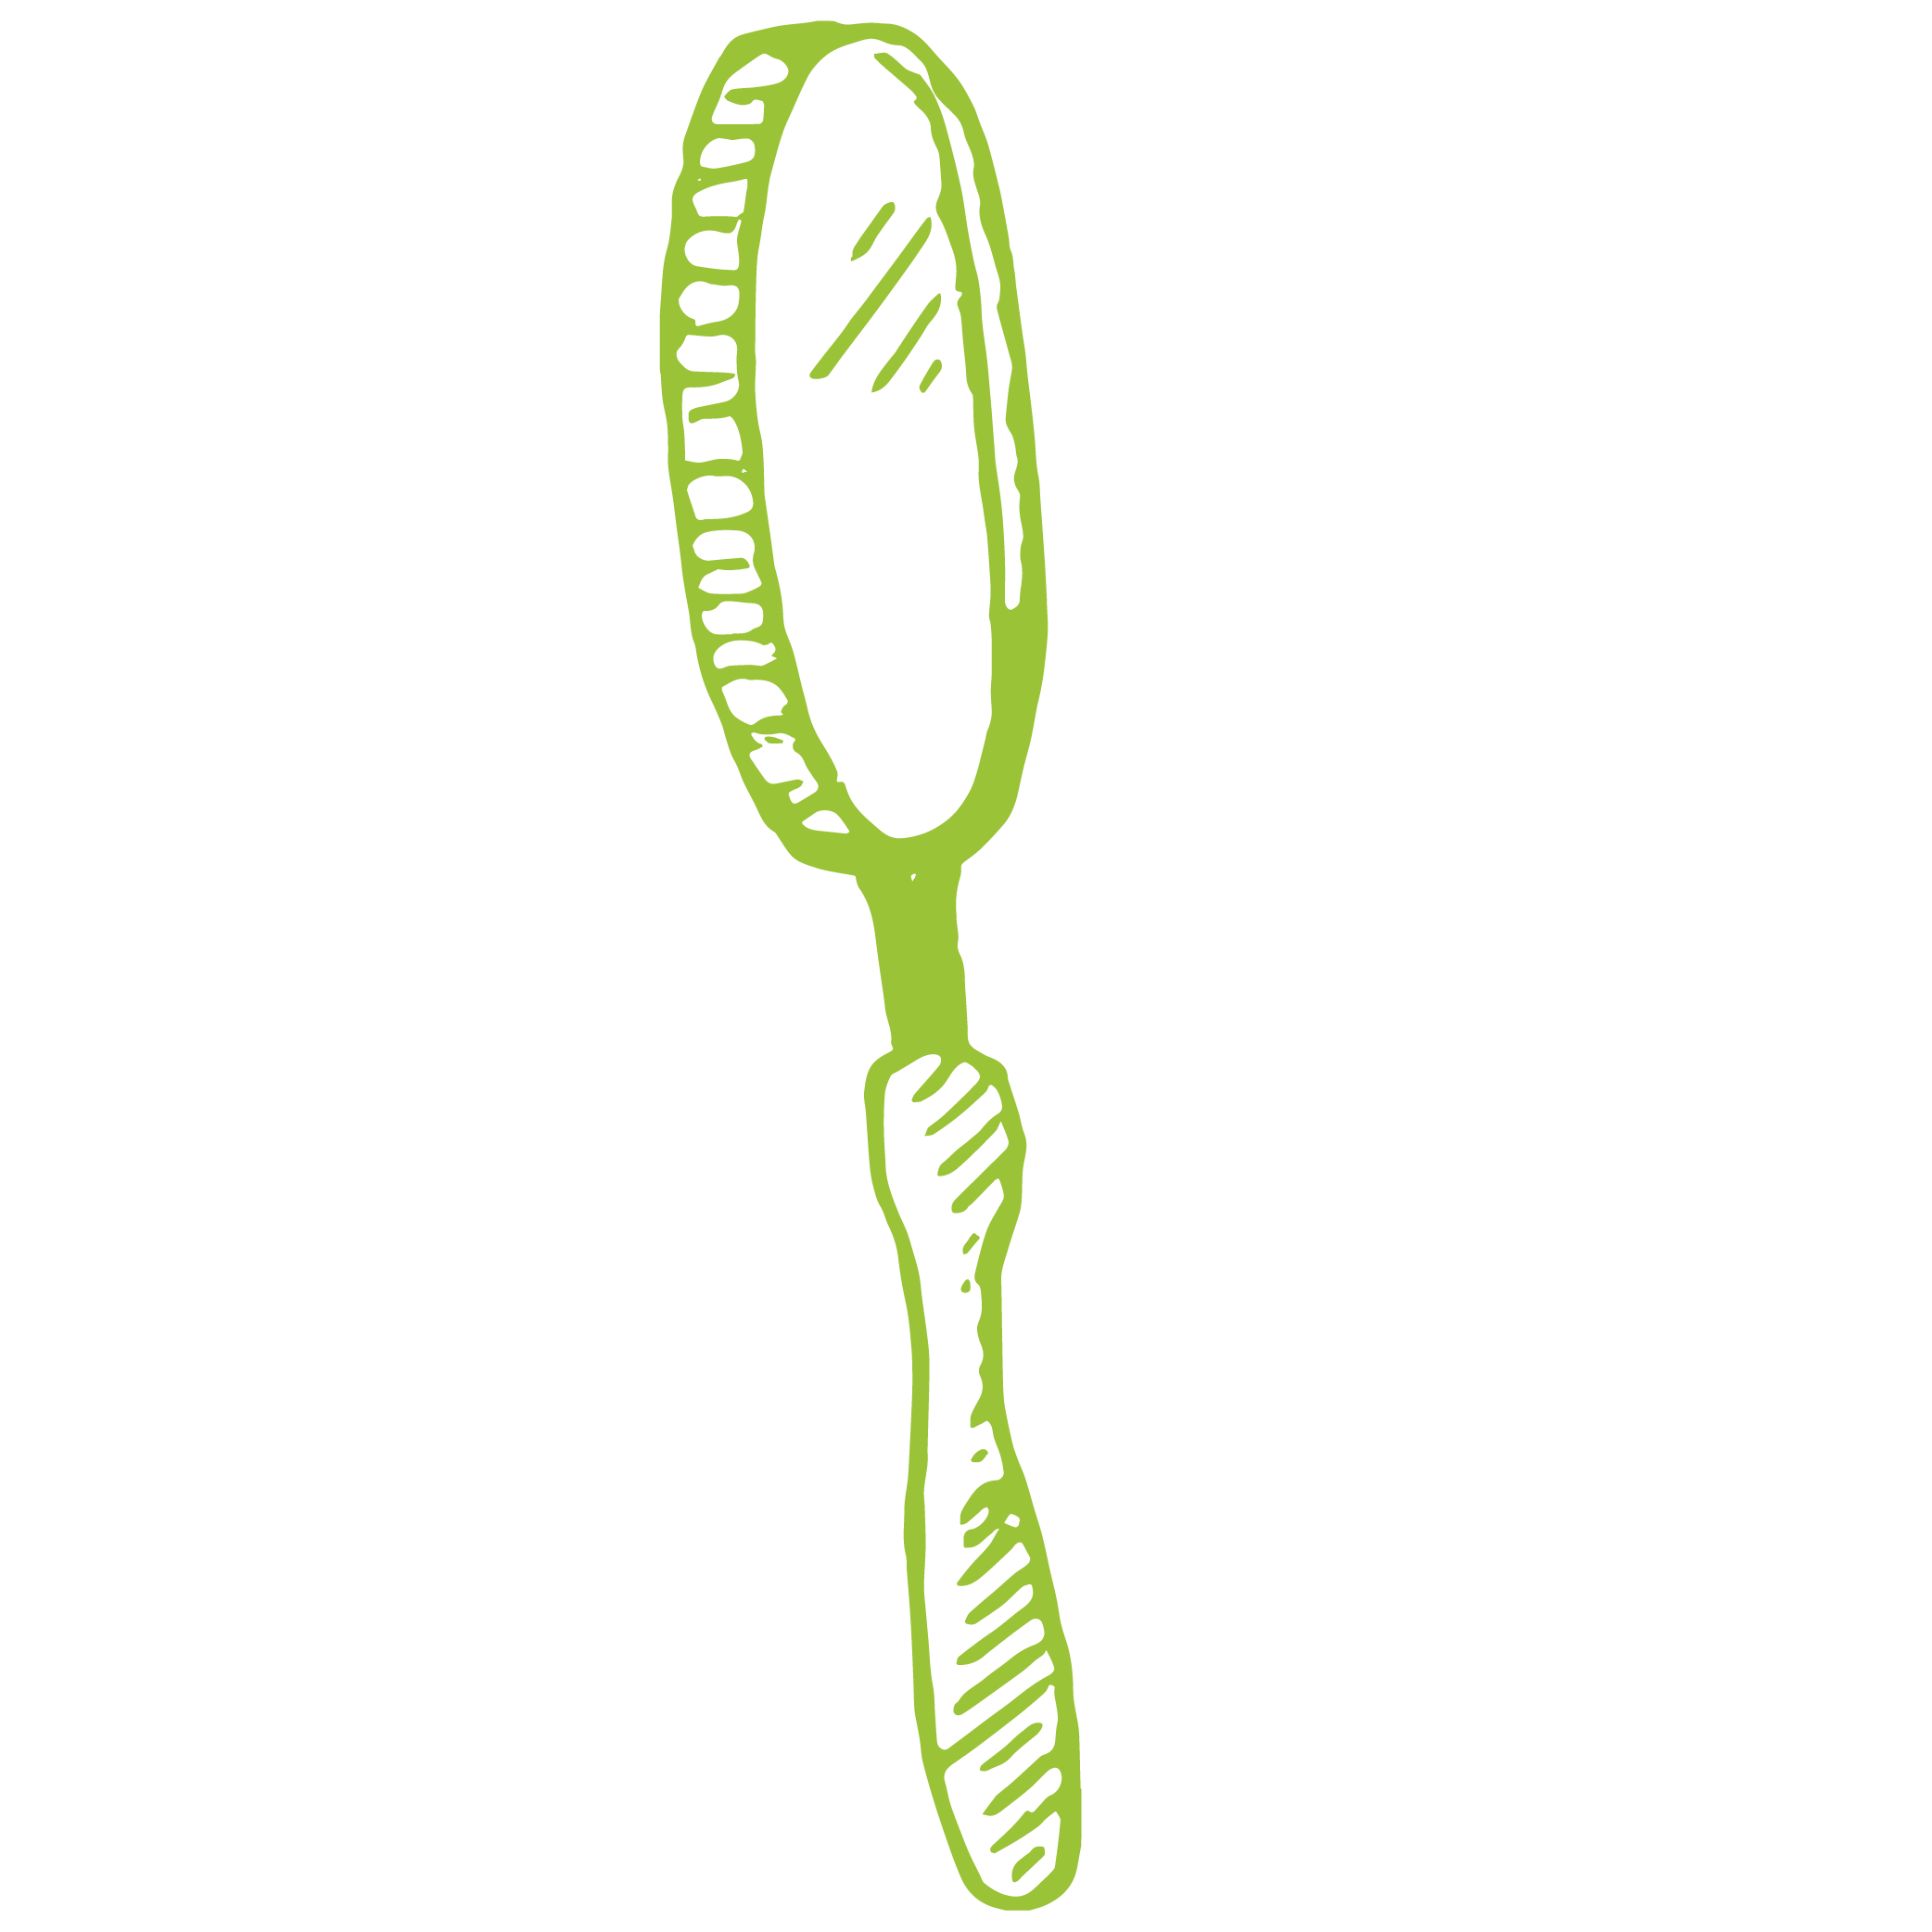 A drawing of a magnifying glass.